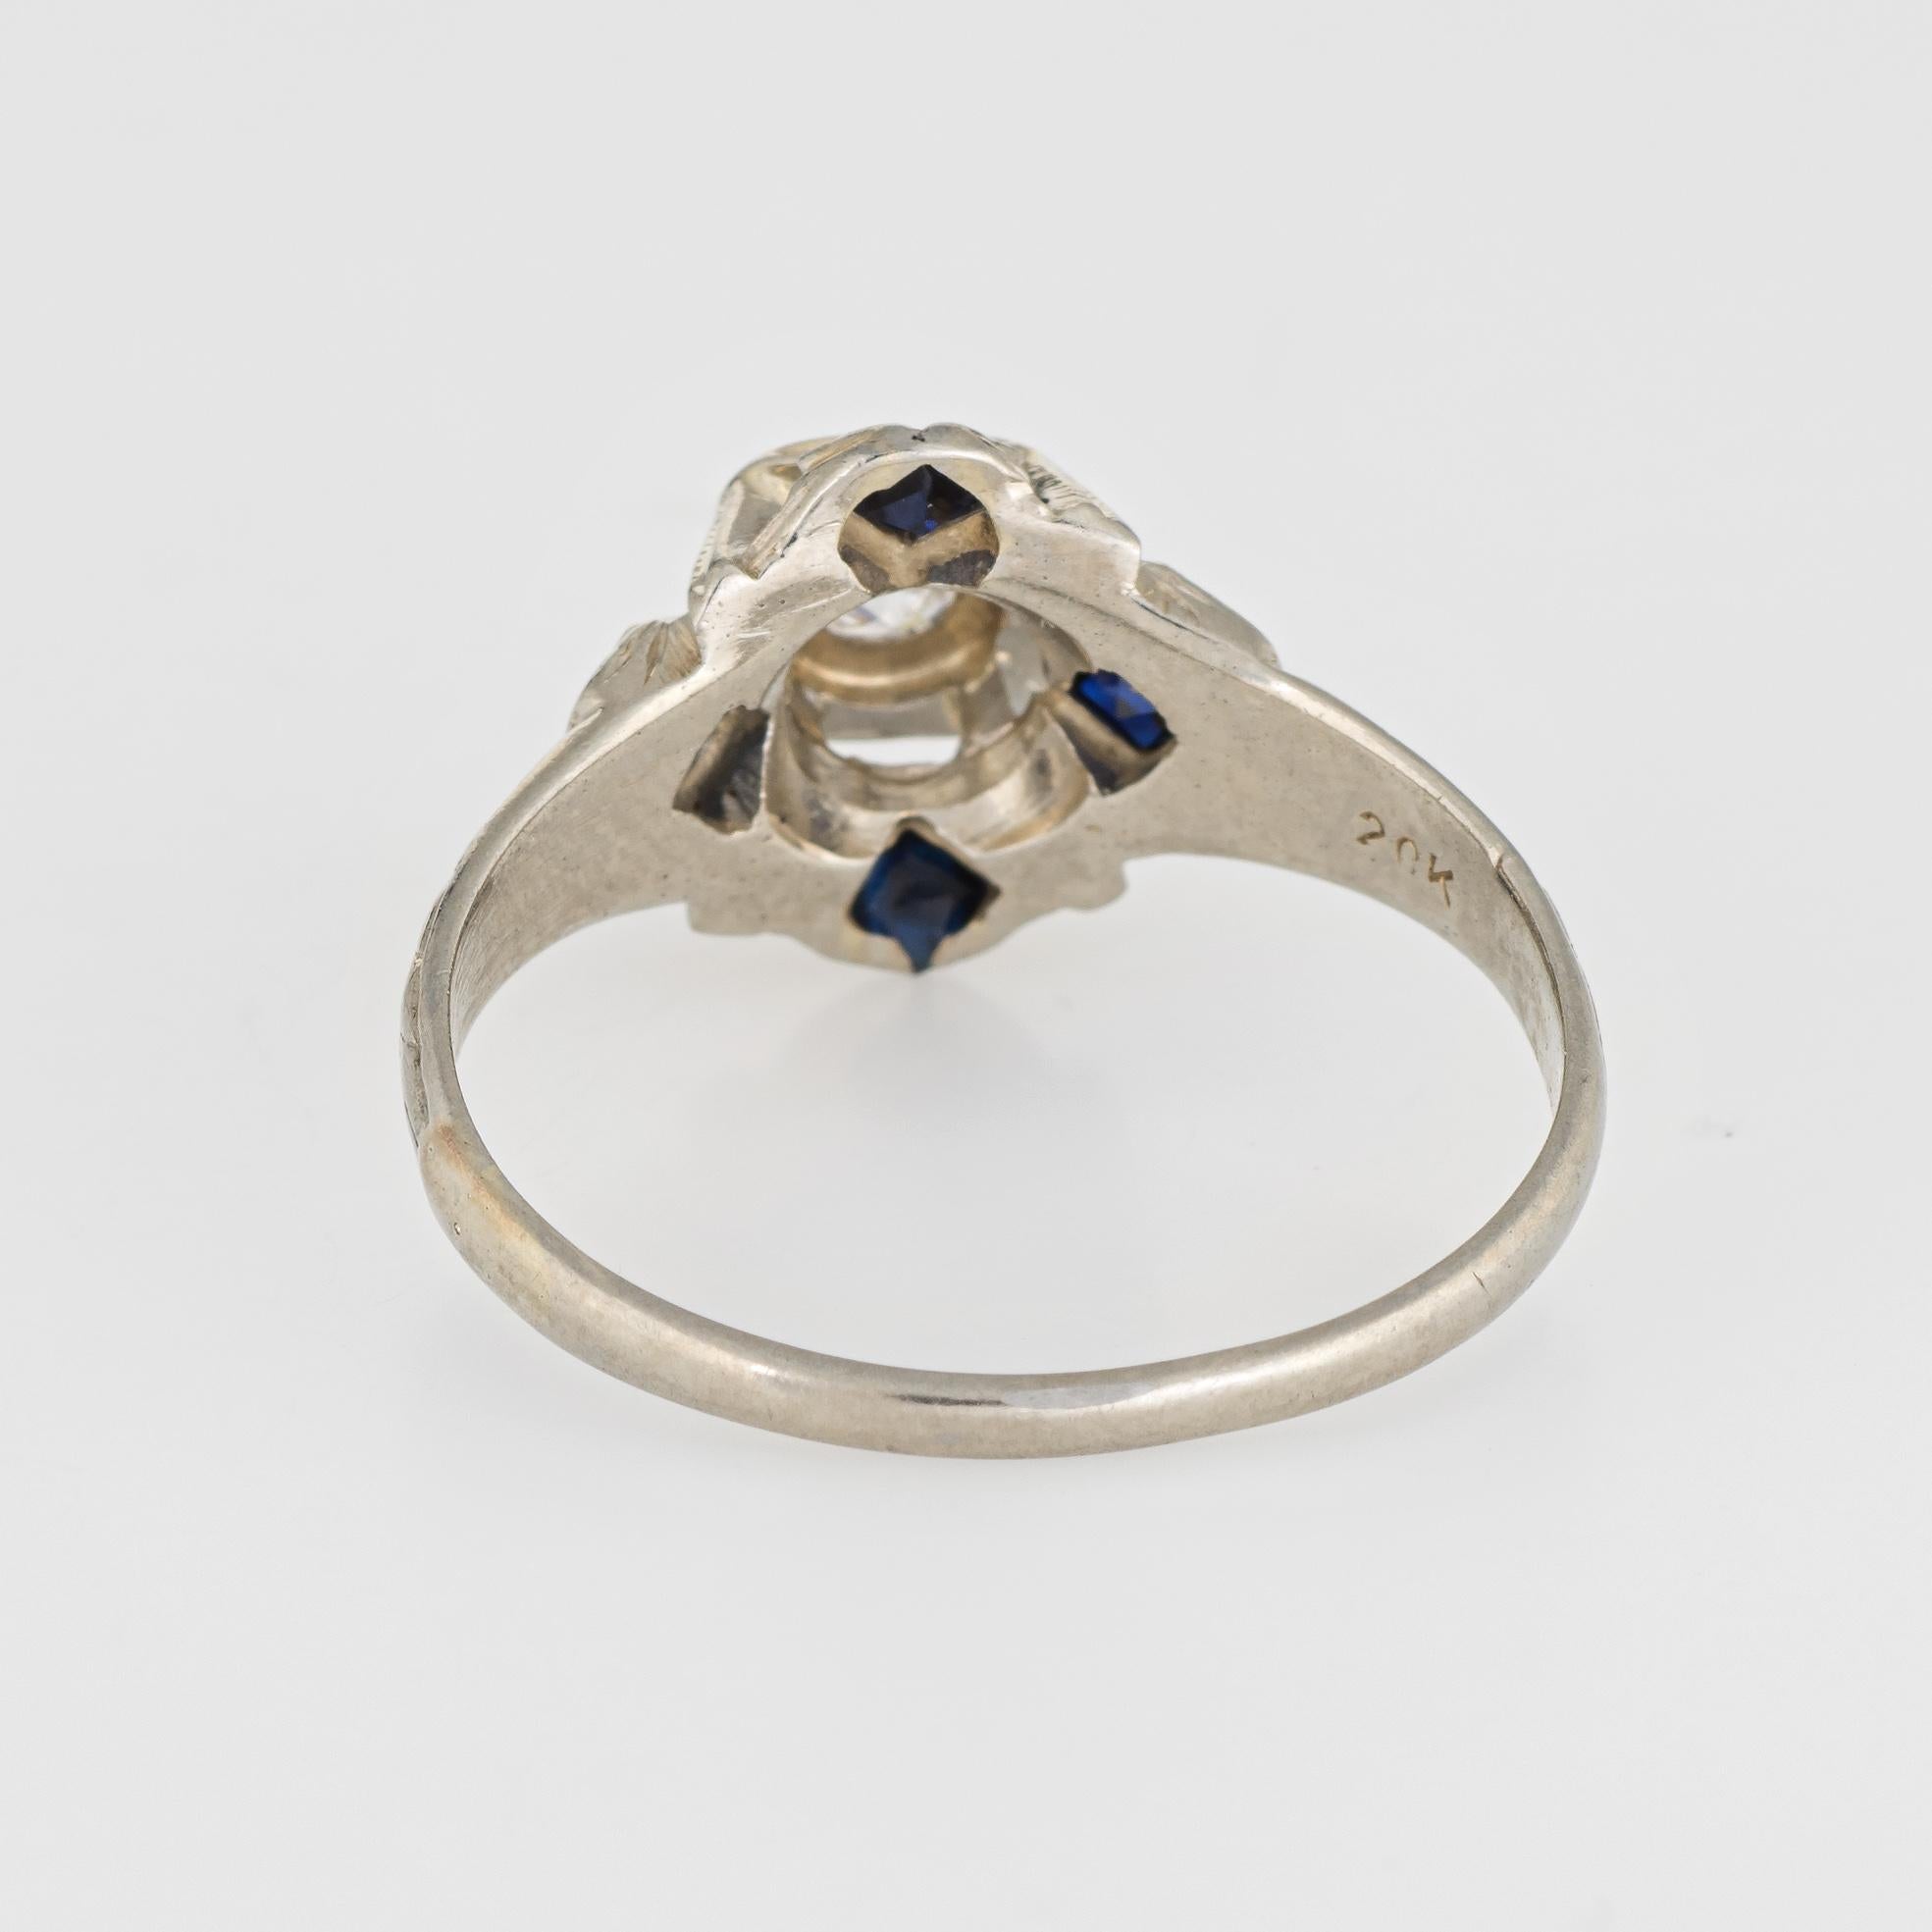 Antique Deco Diamond Sapphire Ring 20k White Gold Vintage Fine Jewelry 6.25 In Good Condition For Sale In Torrance, CA